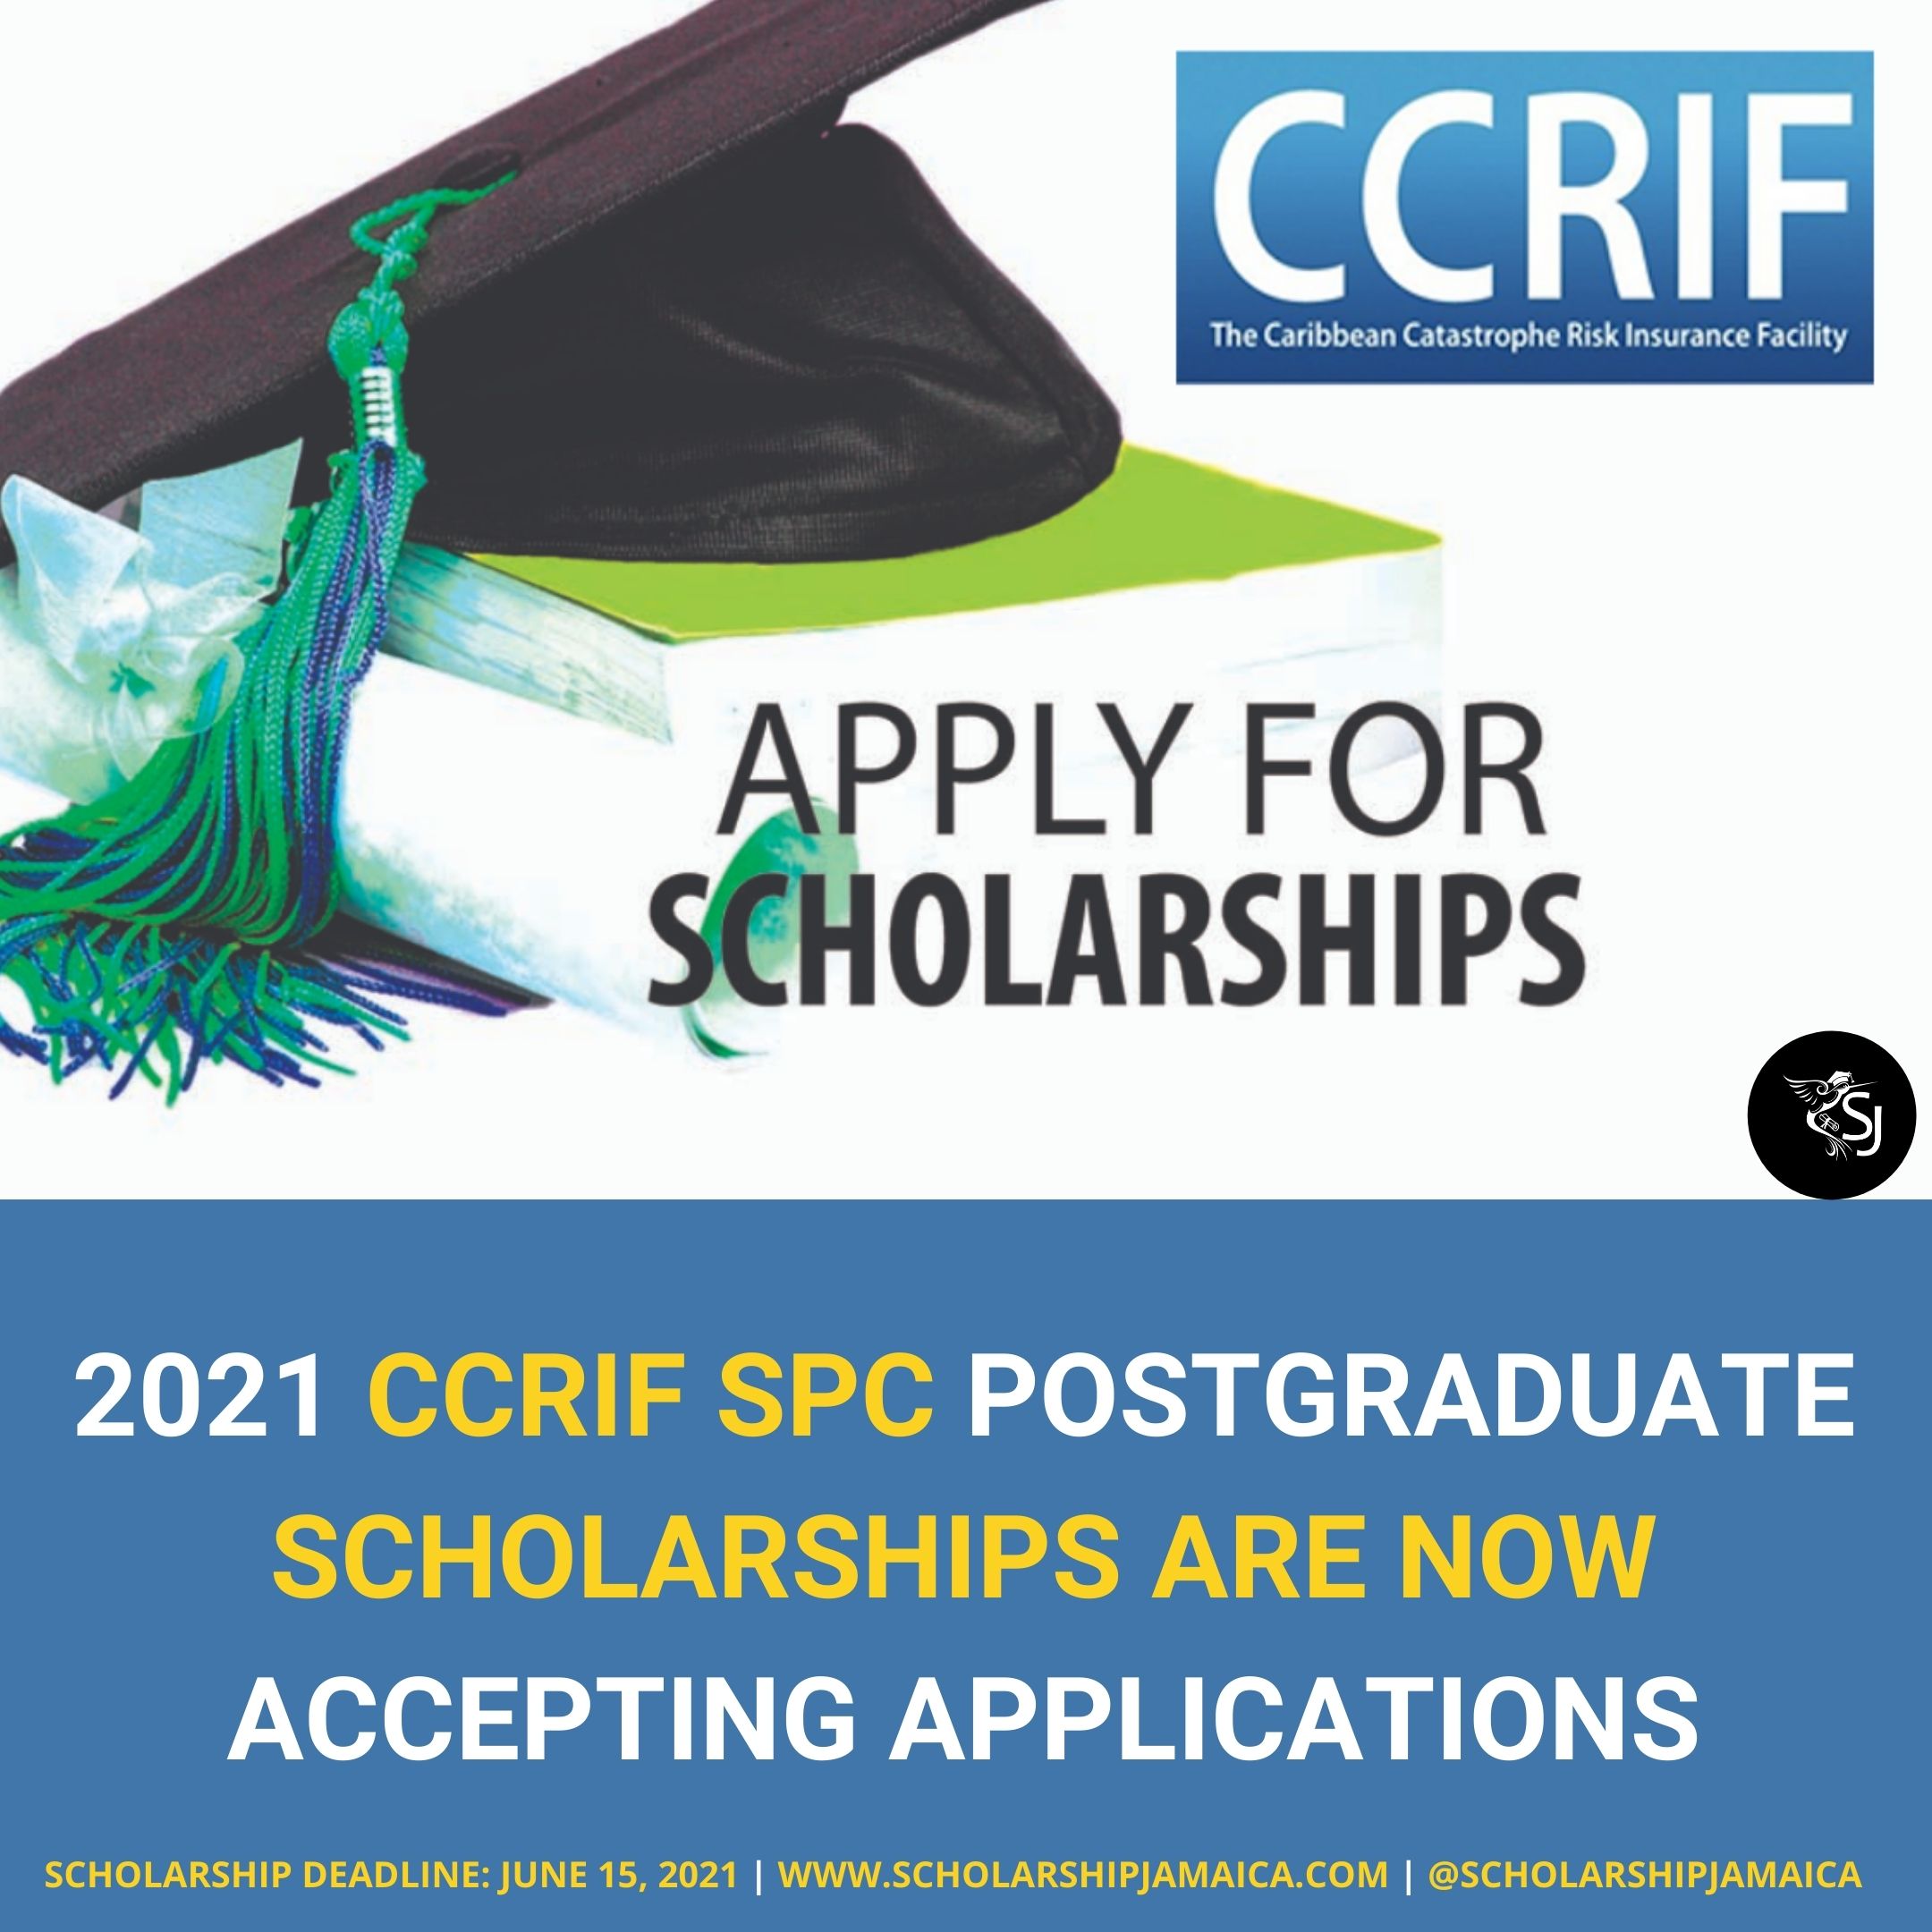 The CCRIF SPC now invites applications for the 2021 postgraduate scholarships under the CCRIF Scholarship Programme for Caribbean nationals studying in the Caribbean, UK or USA.